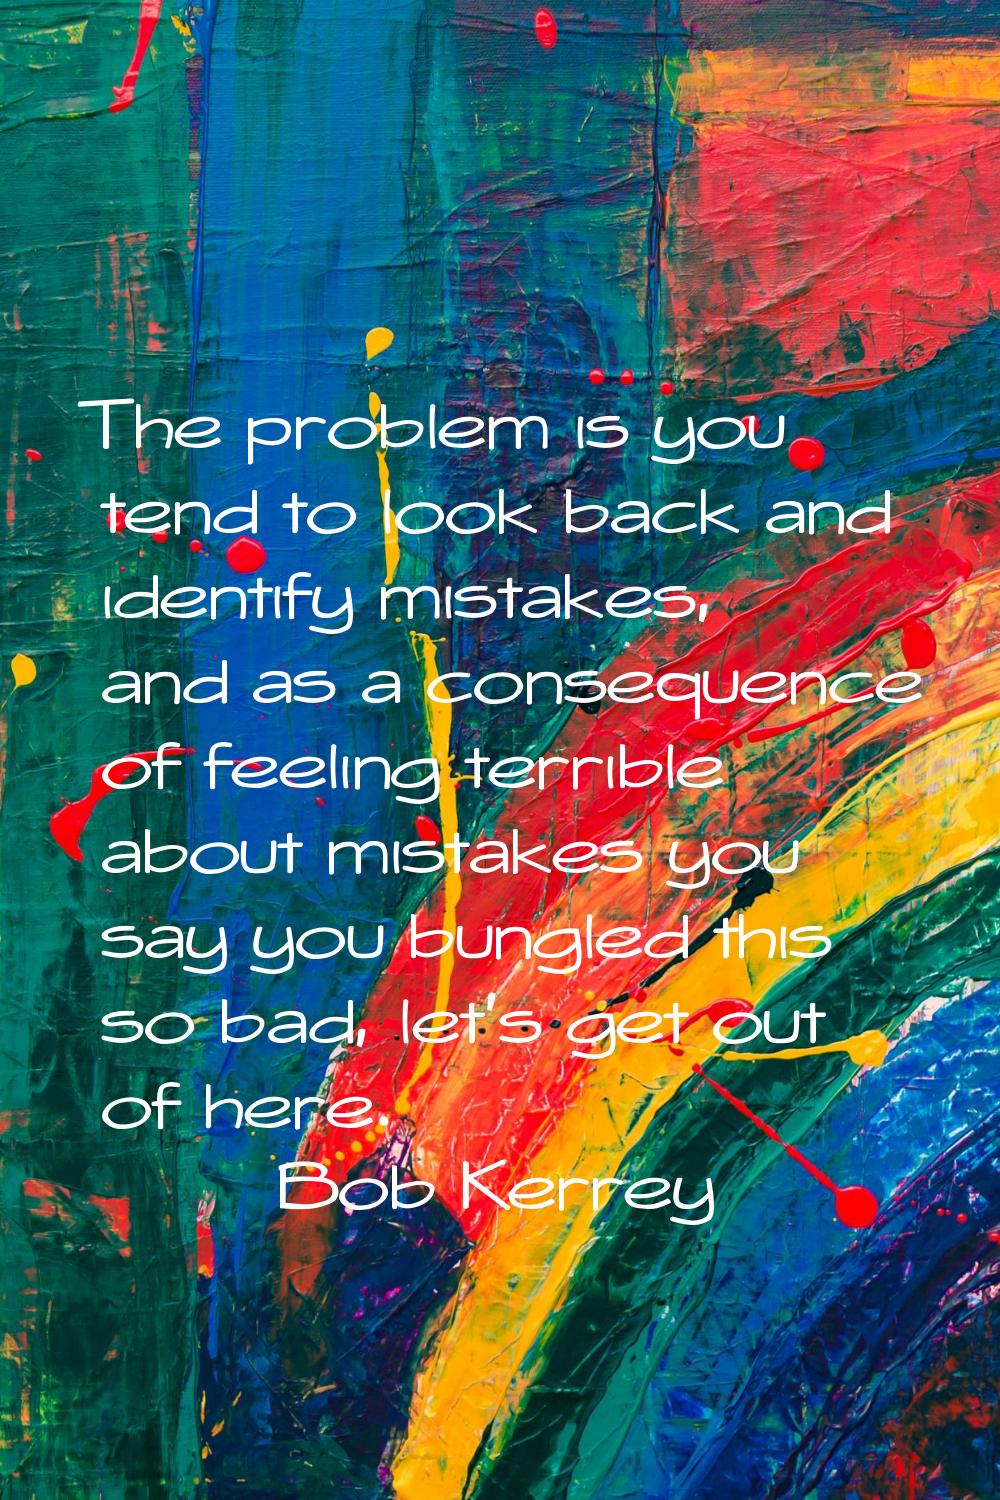 The problem is you tend to look back and identify mistakes, and as a consequence of feeling terribl